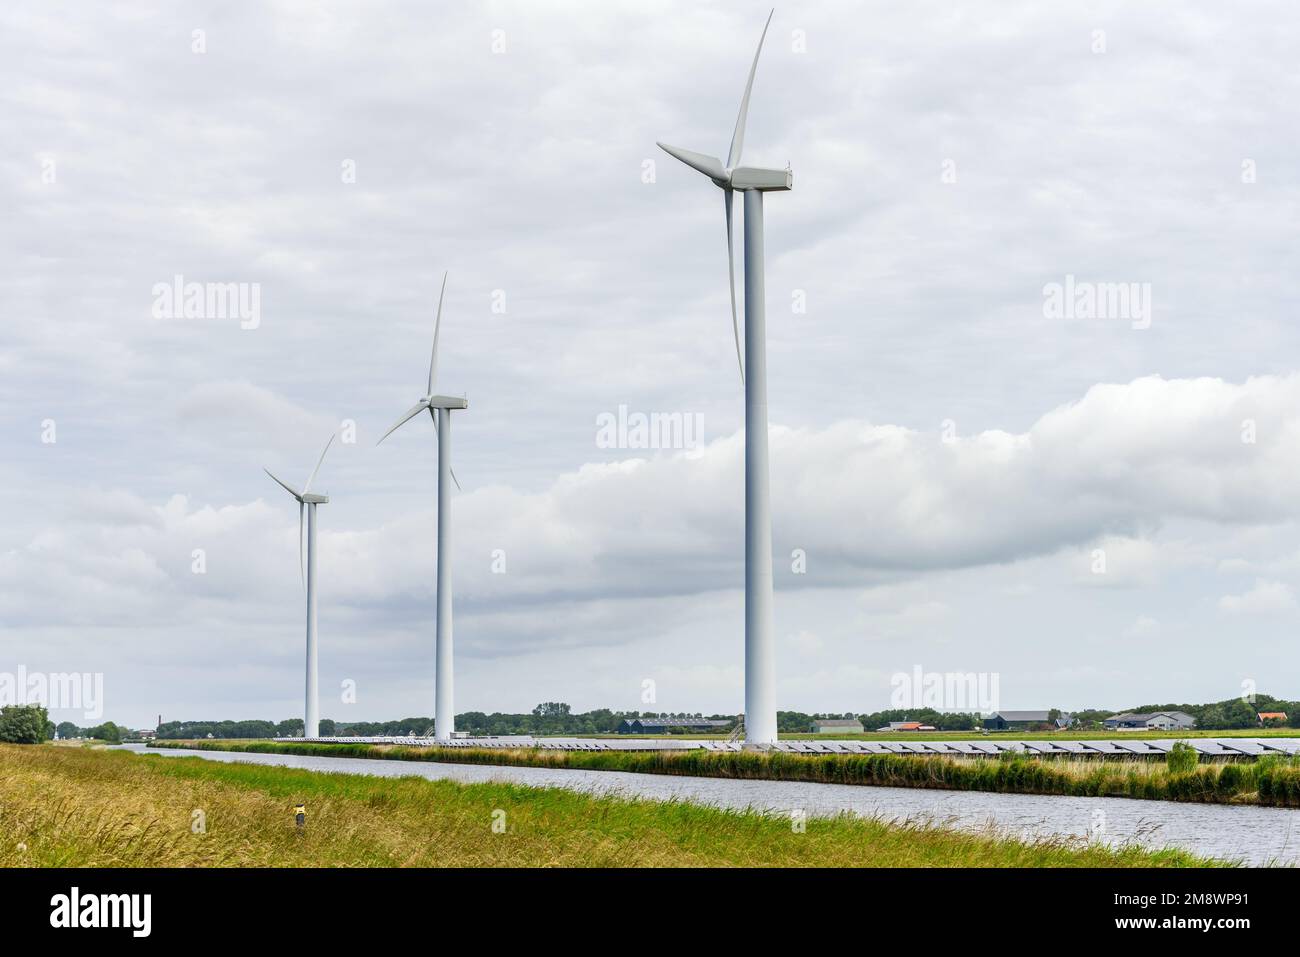 Wind turbines along a canal in the countryside of Netherlands on a cloudy summer day. Rows of solar panels are at the foot of the turbines. Stock Photo